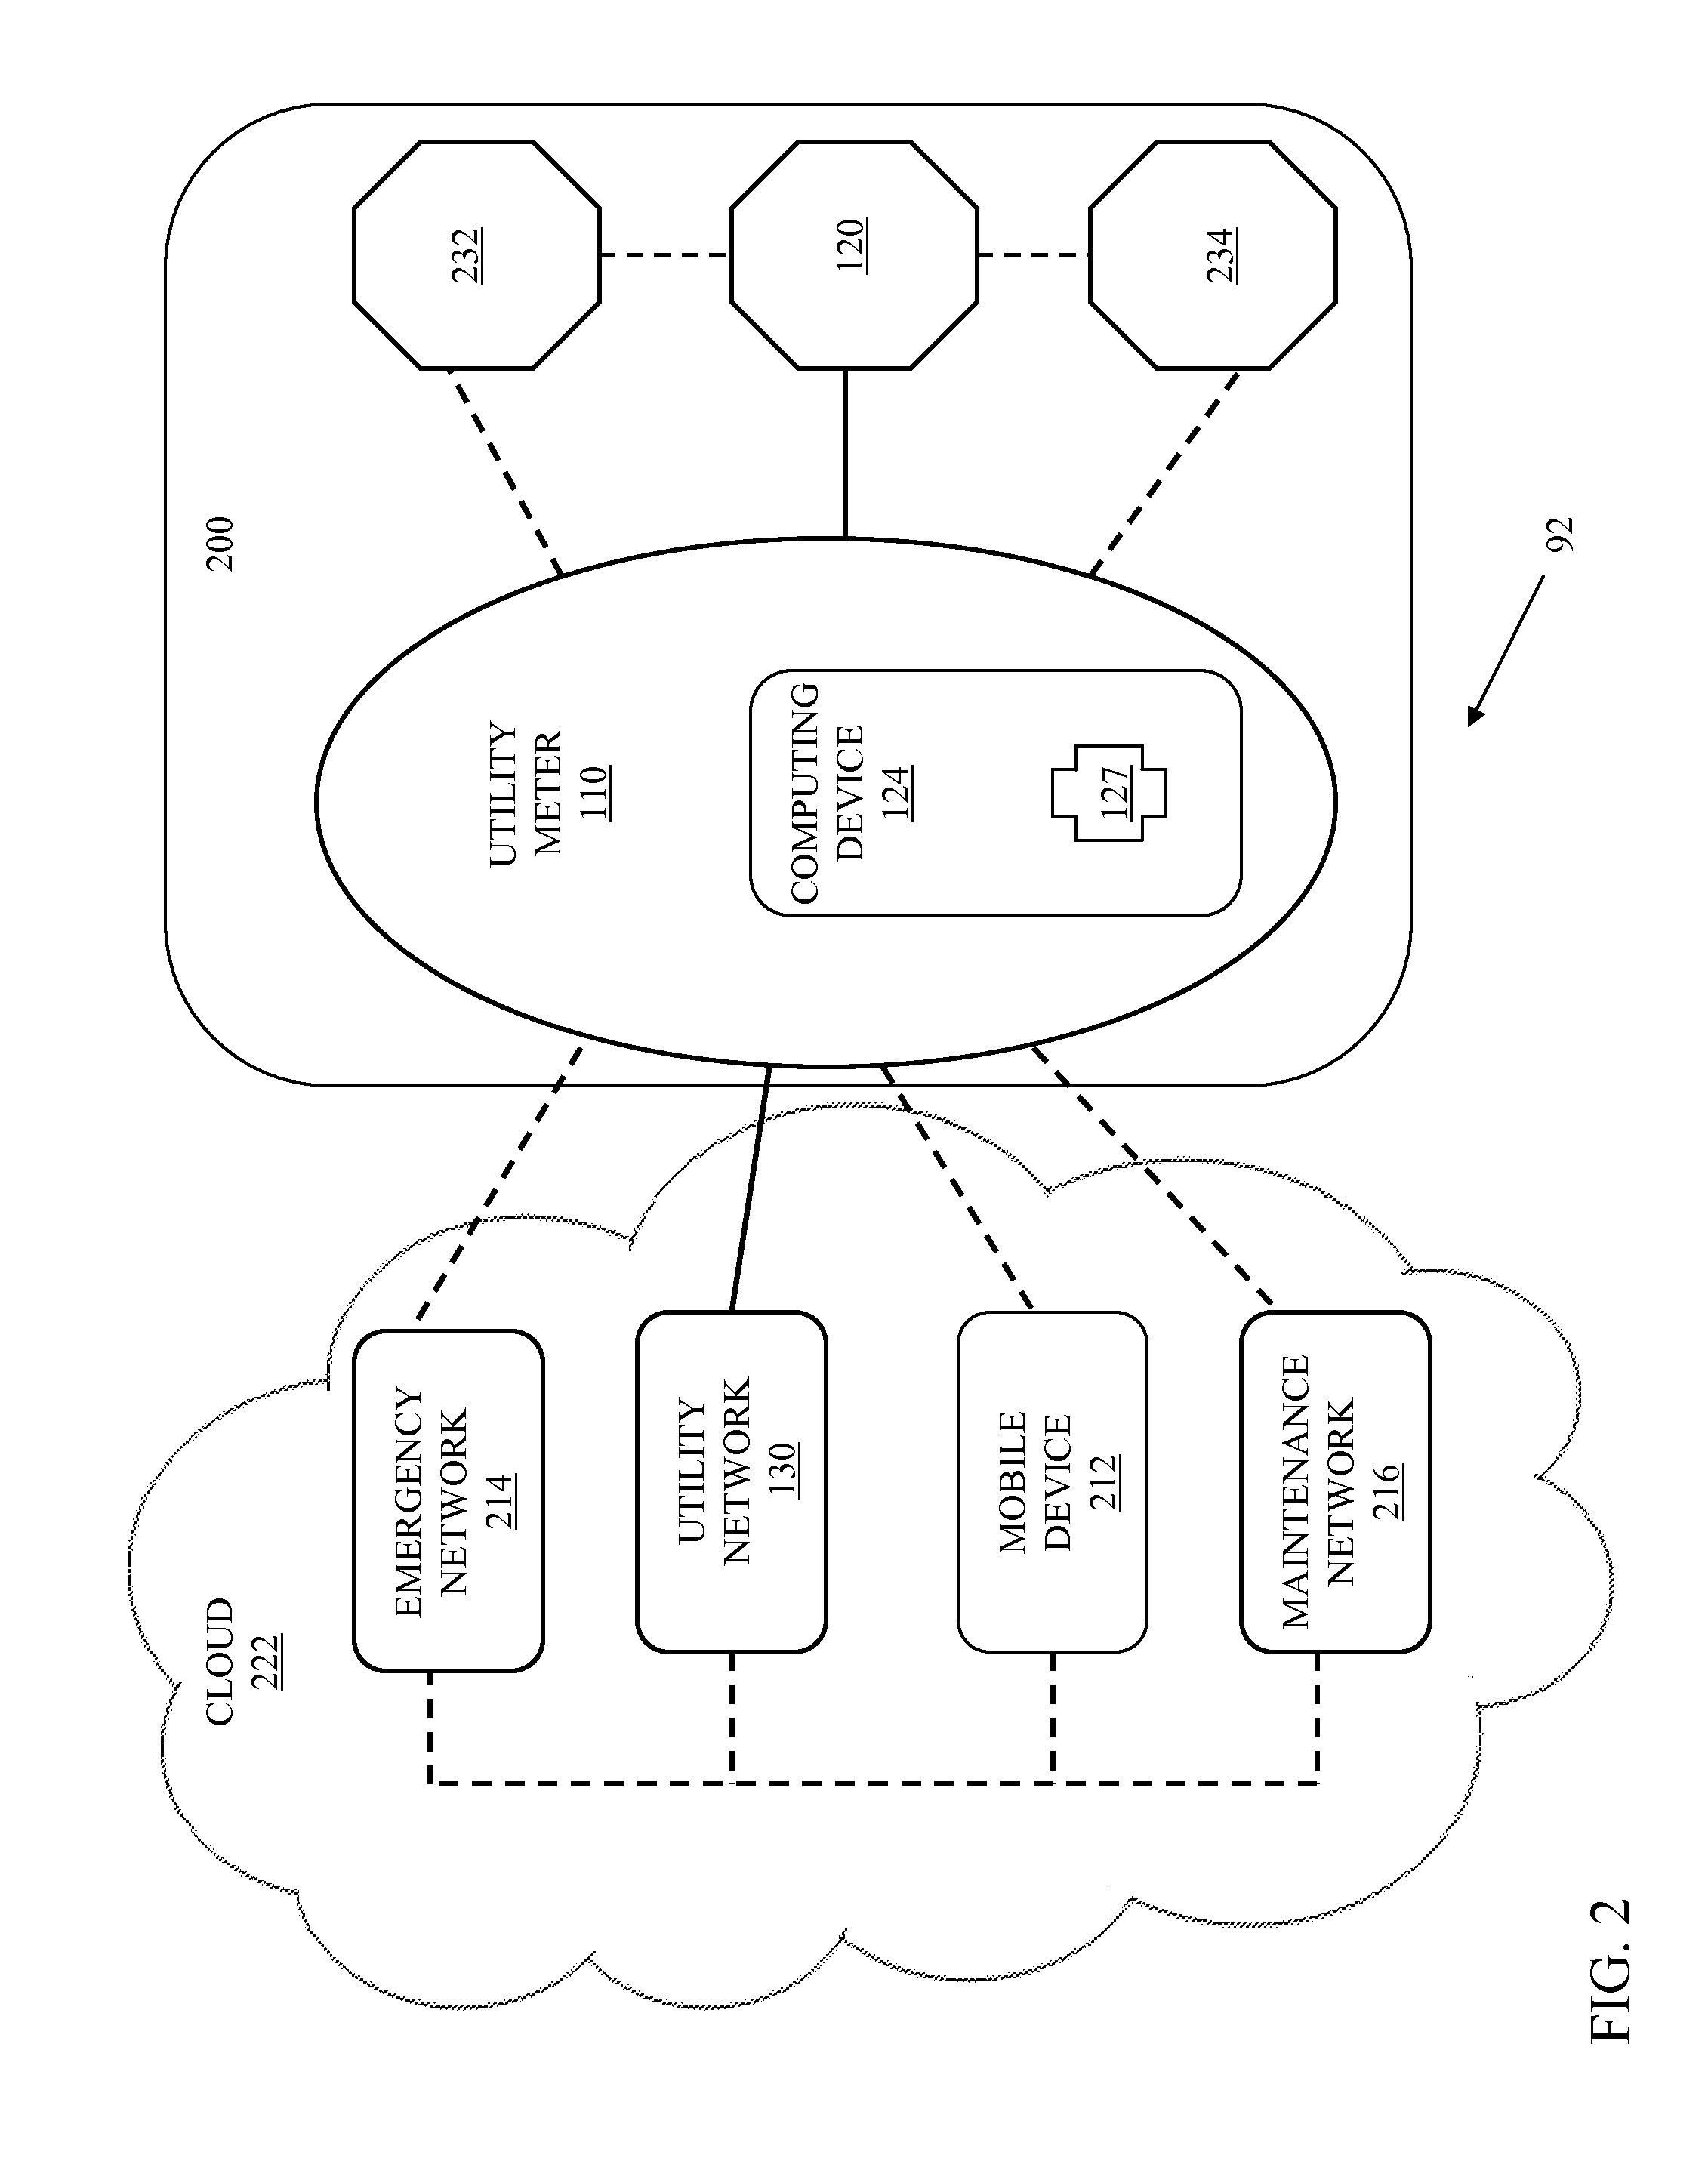 Monitoring system for an electrical device